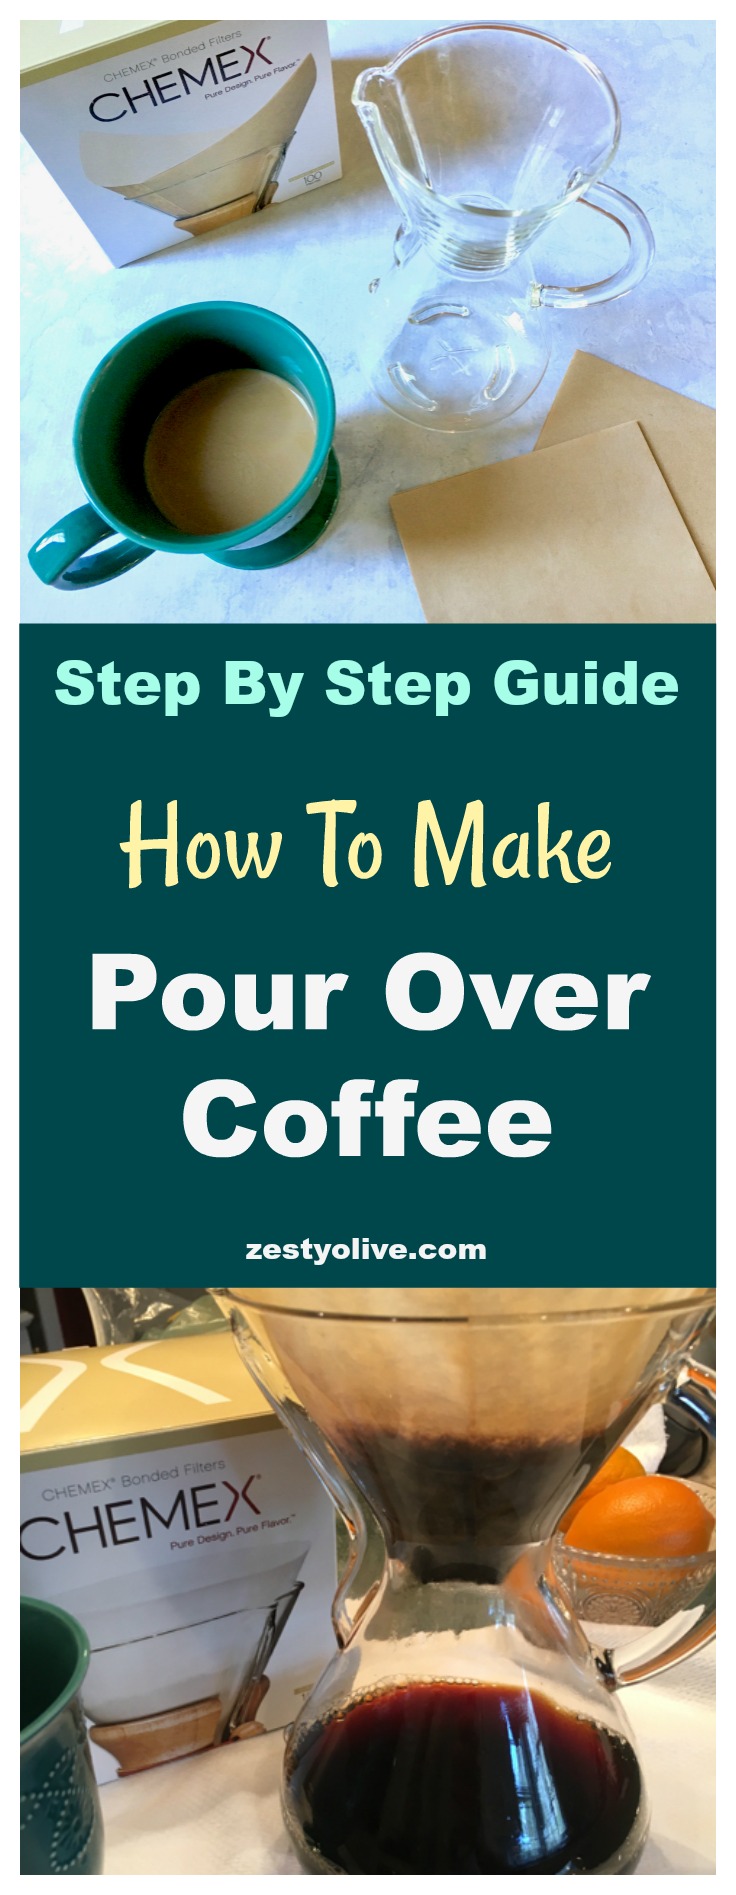 http://zestyolive.com/wp-content/uploads/2016/02/how-to-make-pour-over-coffee-zestyolive-1.jpg